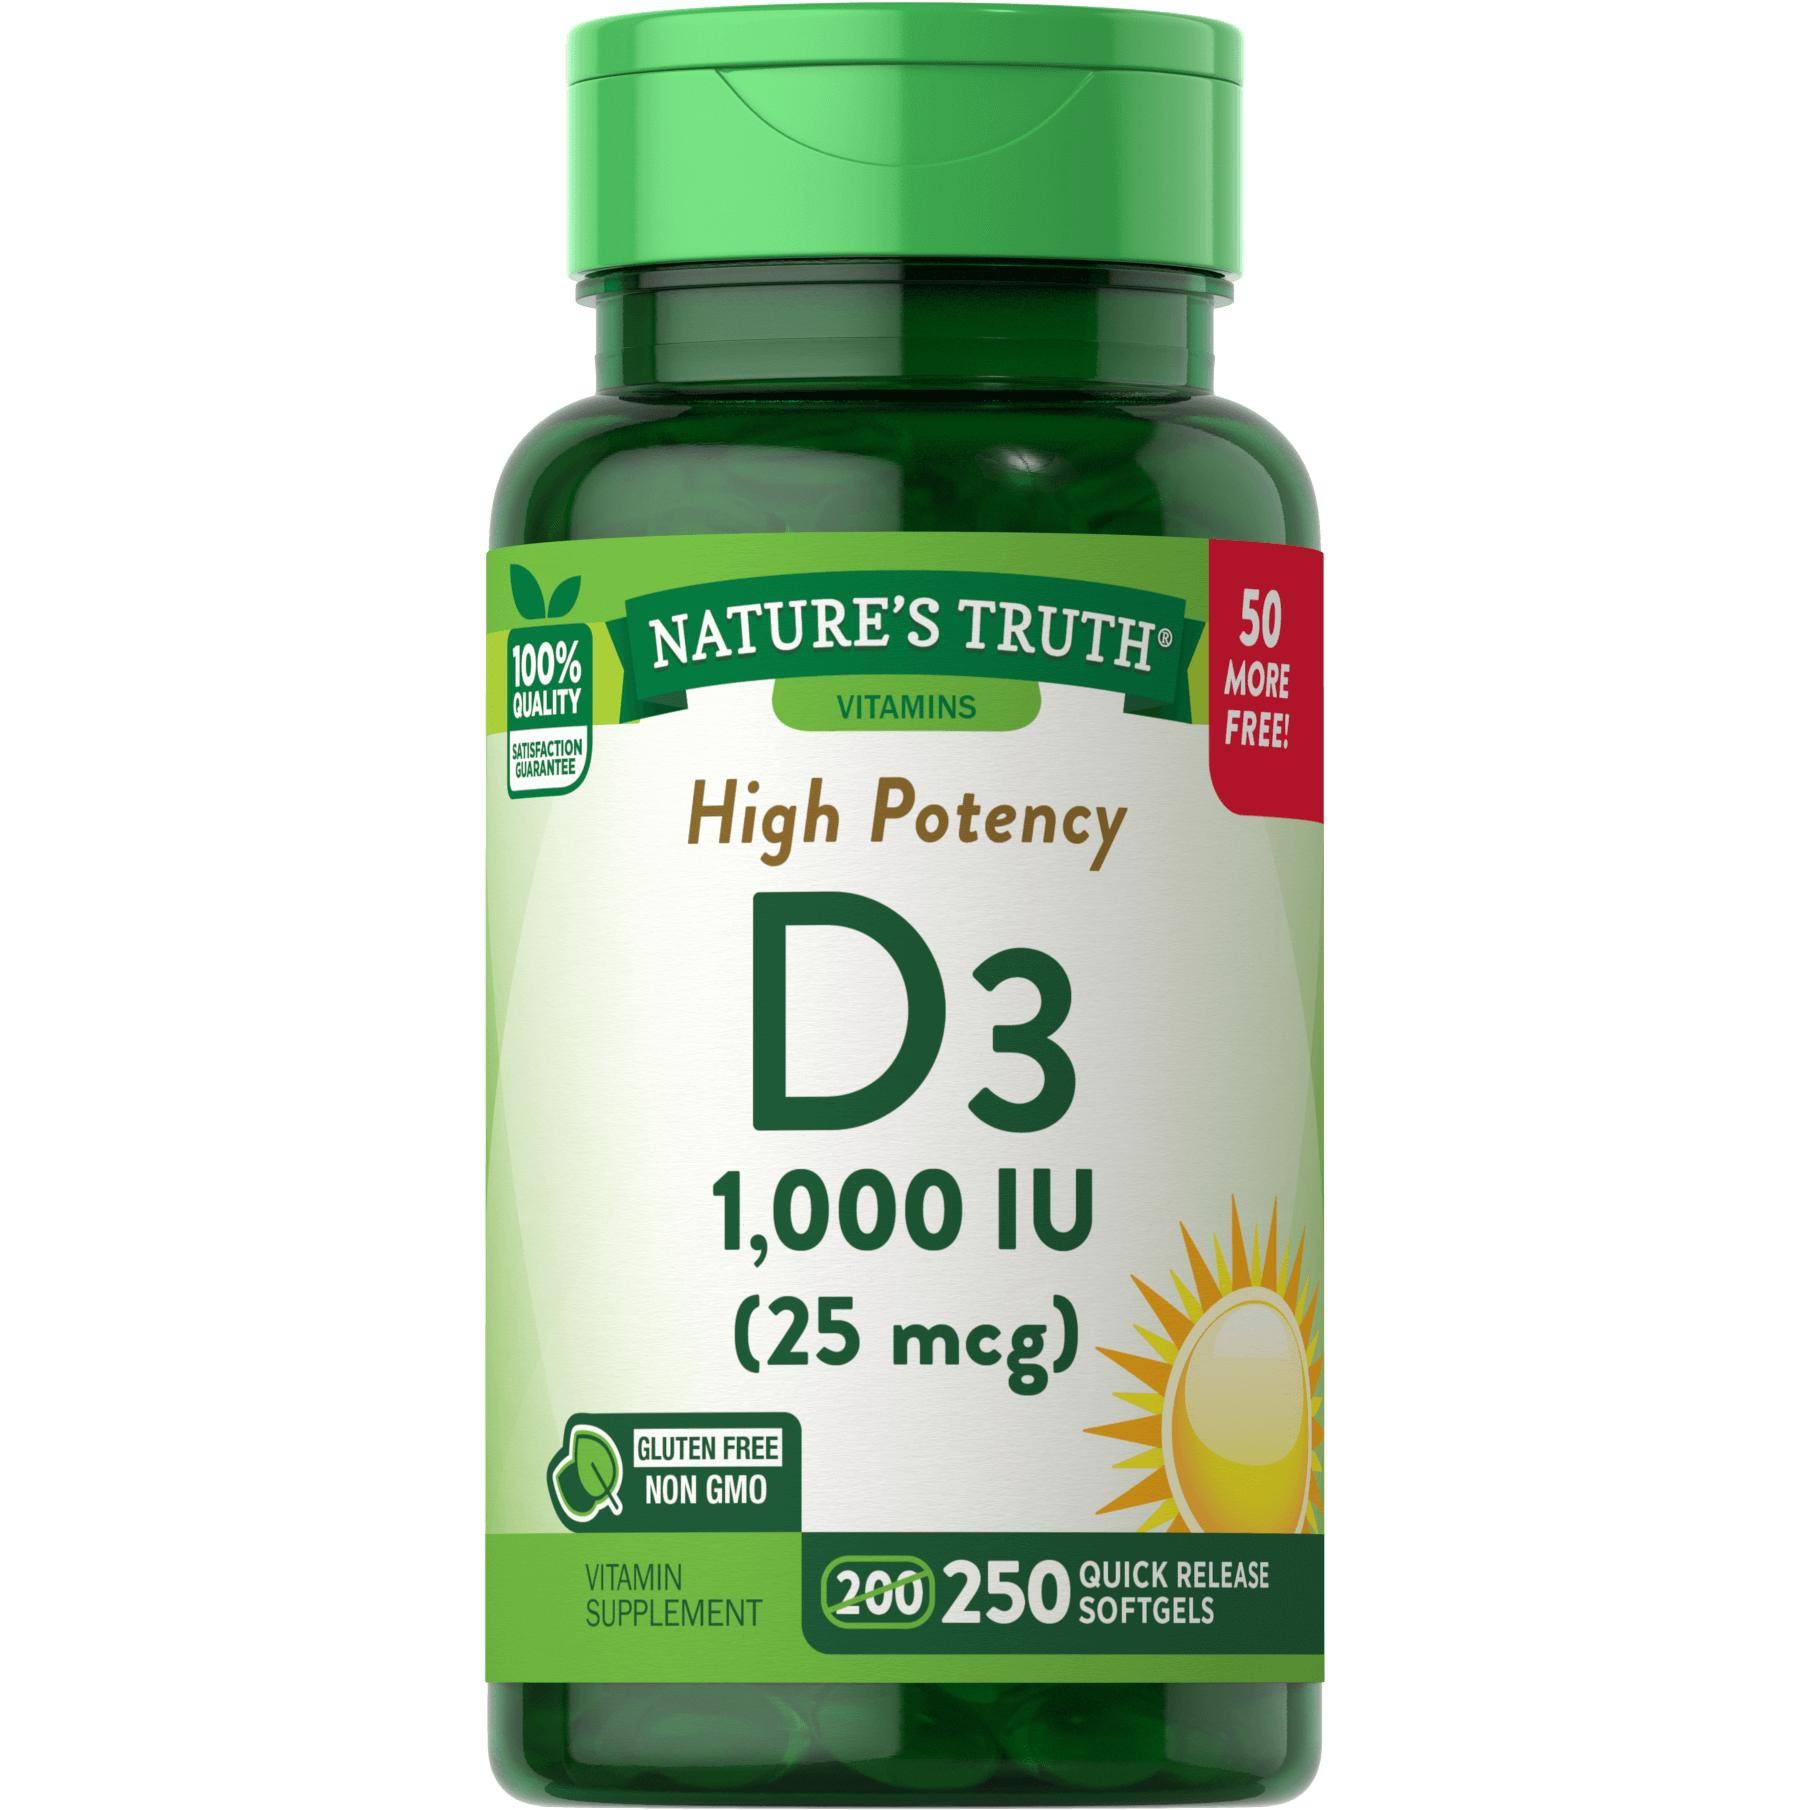 Nature's Truth Vitamin D3, 1,000 IU, Value Size, 200+50 Count